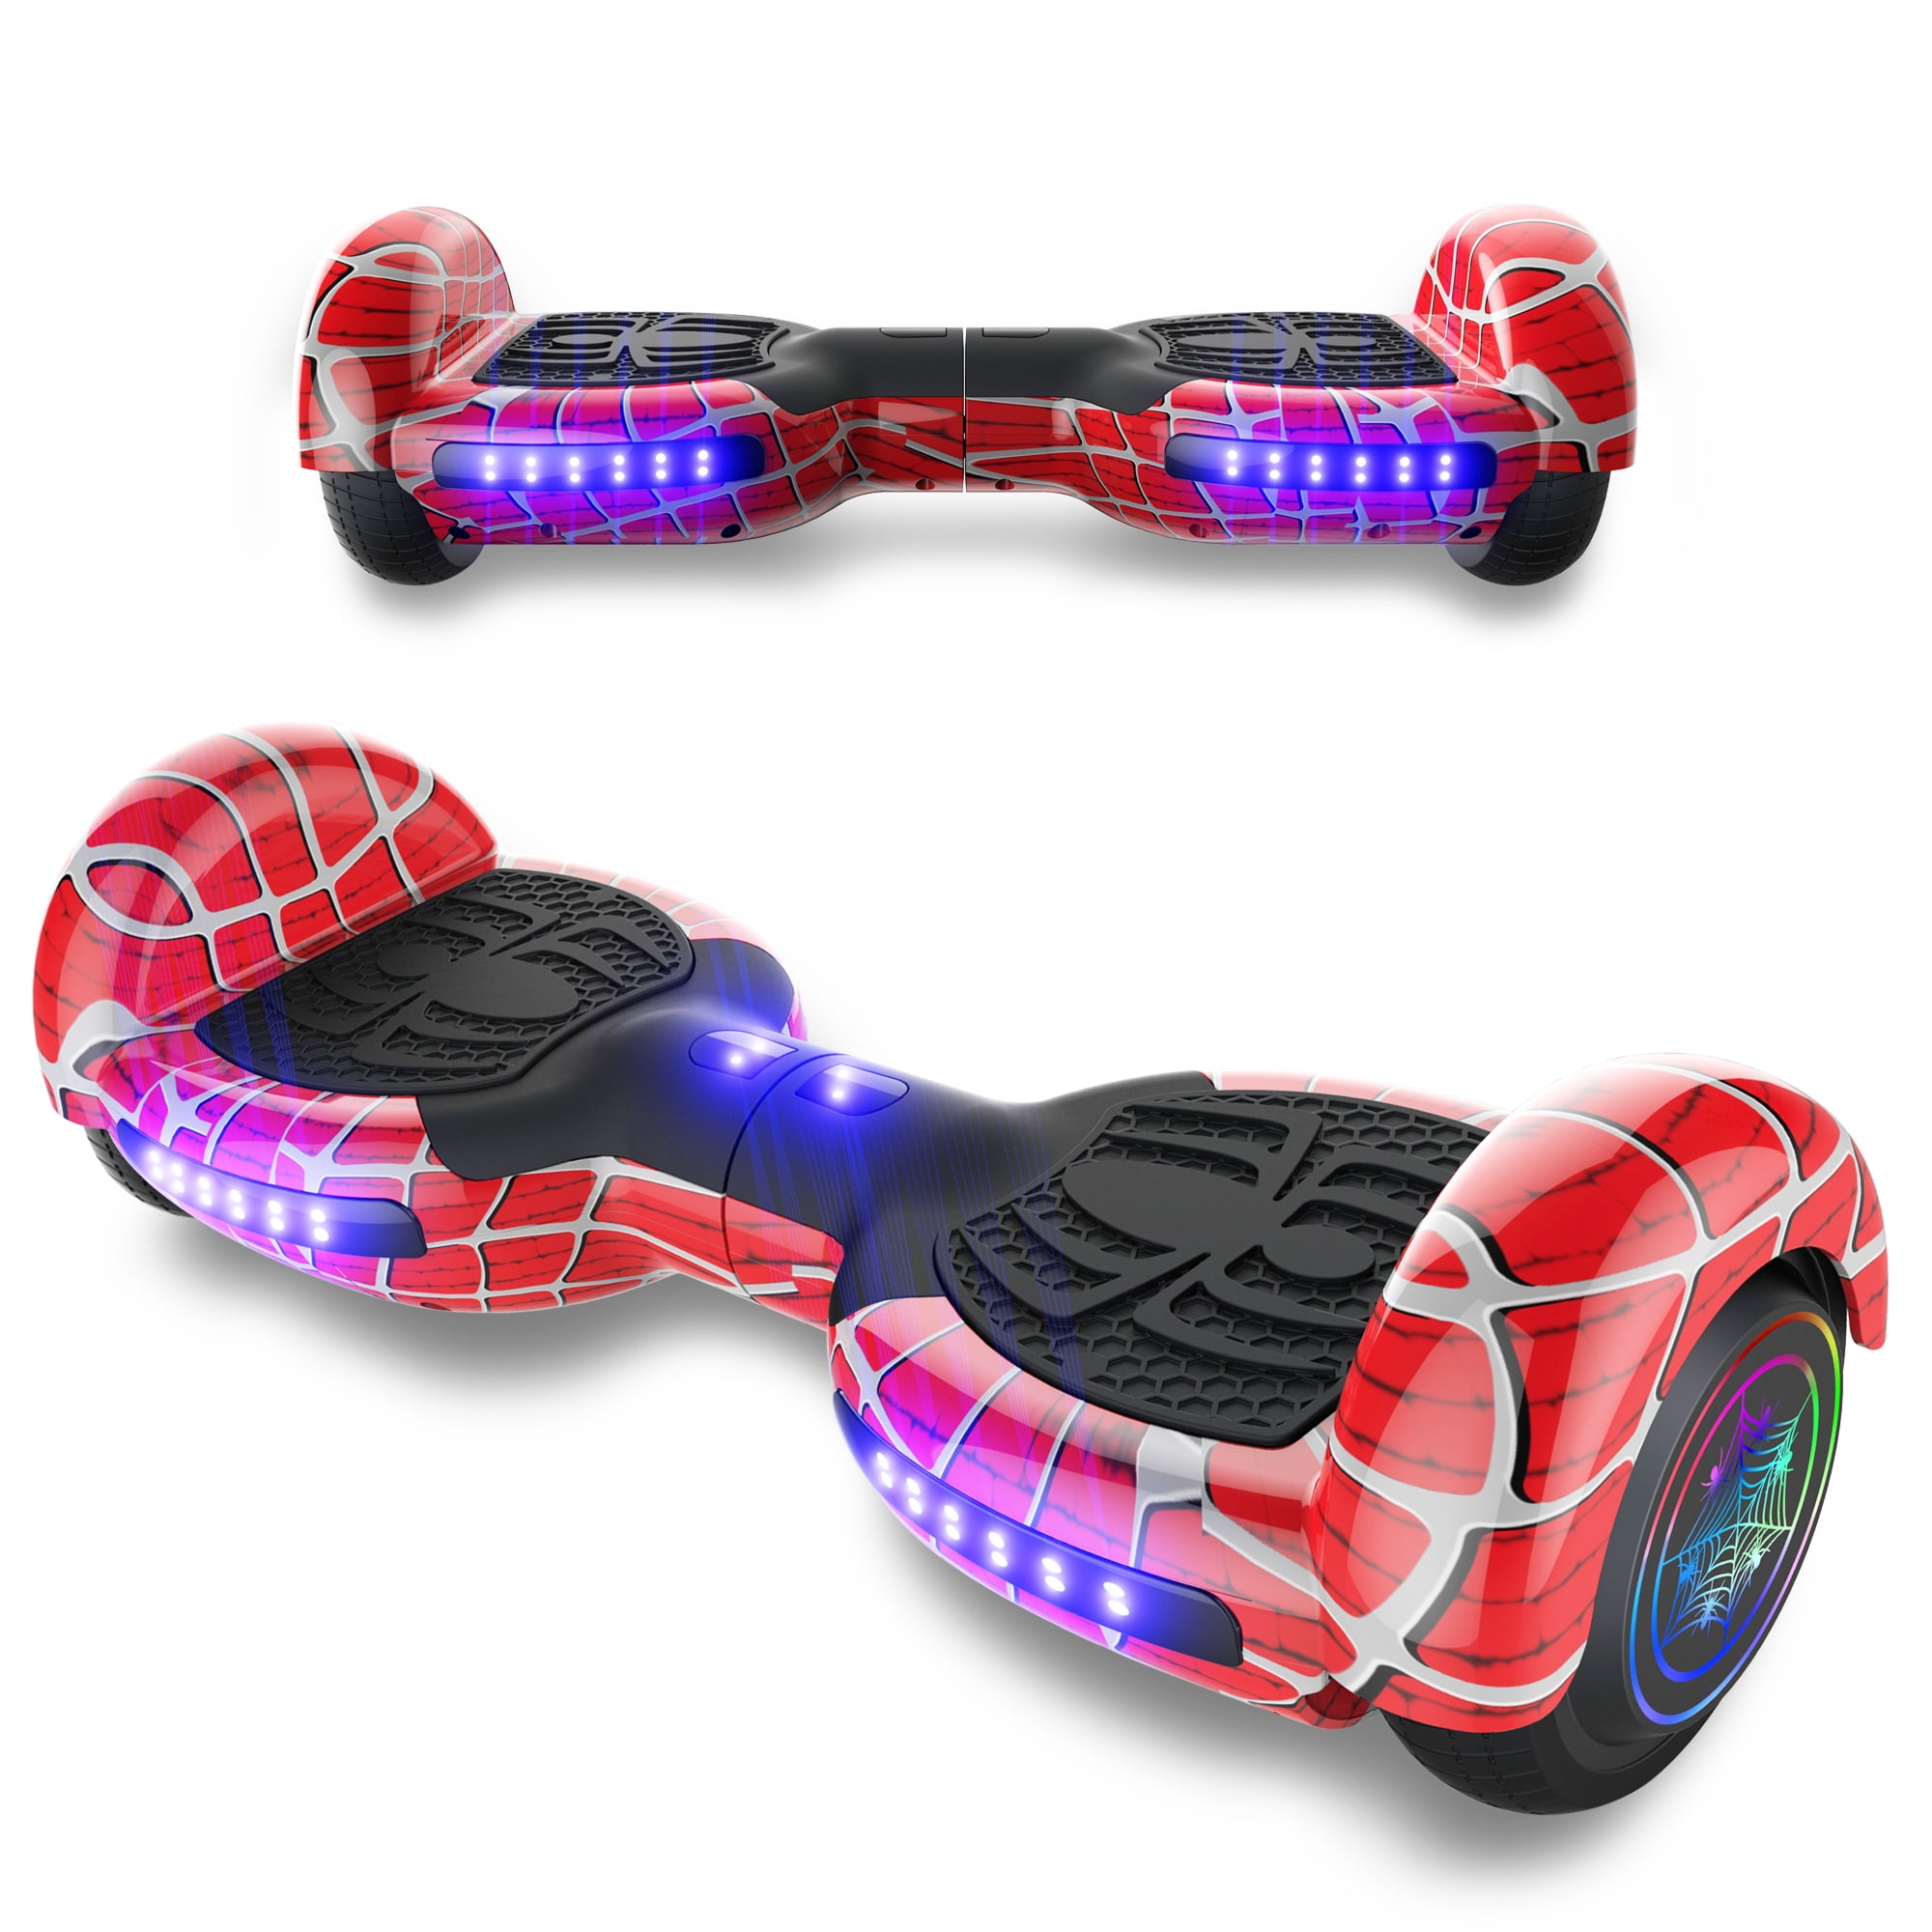 Hoverboard|Hover Board Ul2272 Certified Self Balancing Electric Scooter with Bluetooth&LED for Kids&Adult Cool&Fun 6.5 Chrome Surface Hoverboards Perfect Christmas|Birthday Gift 